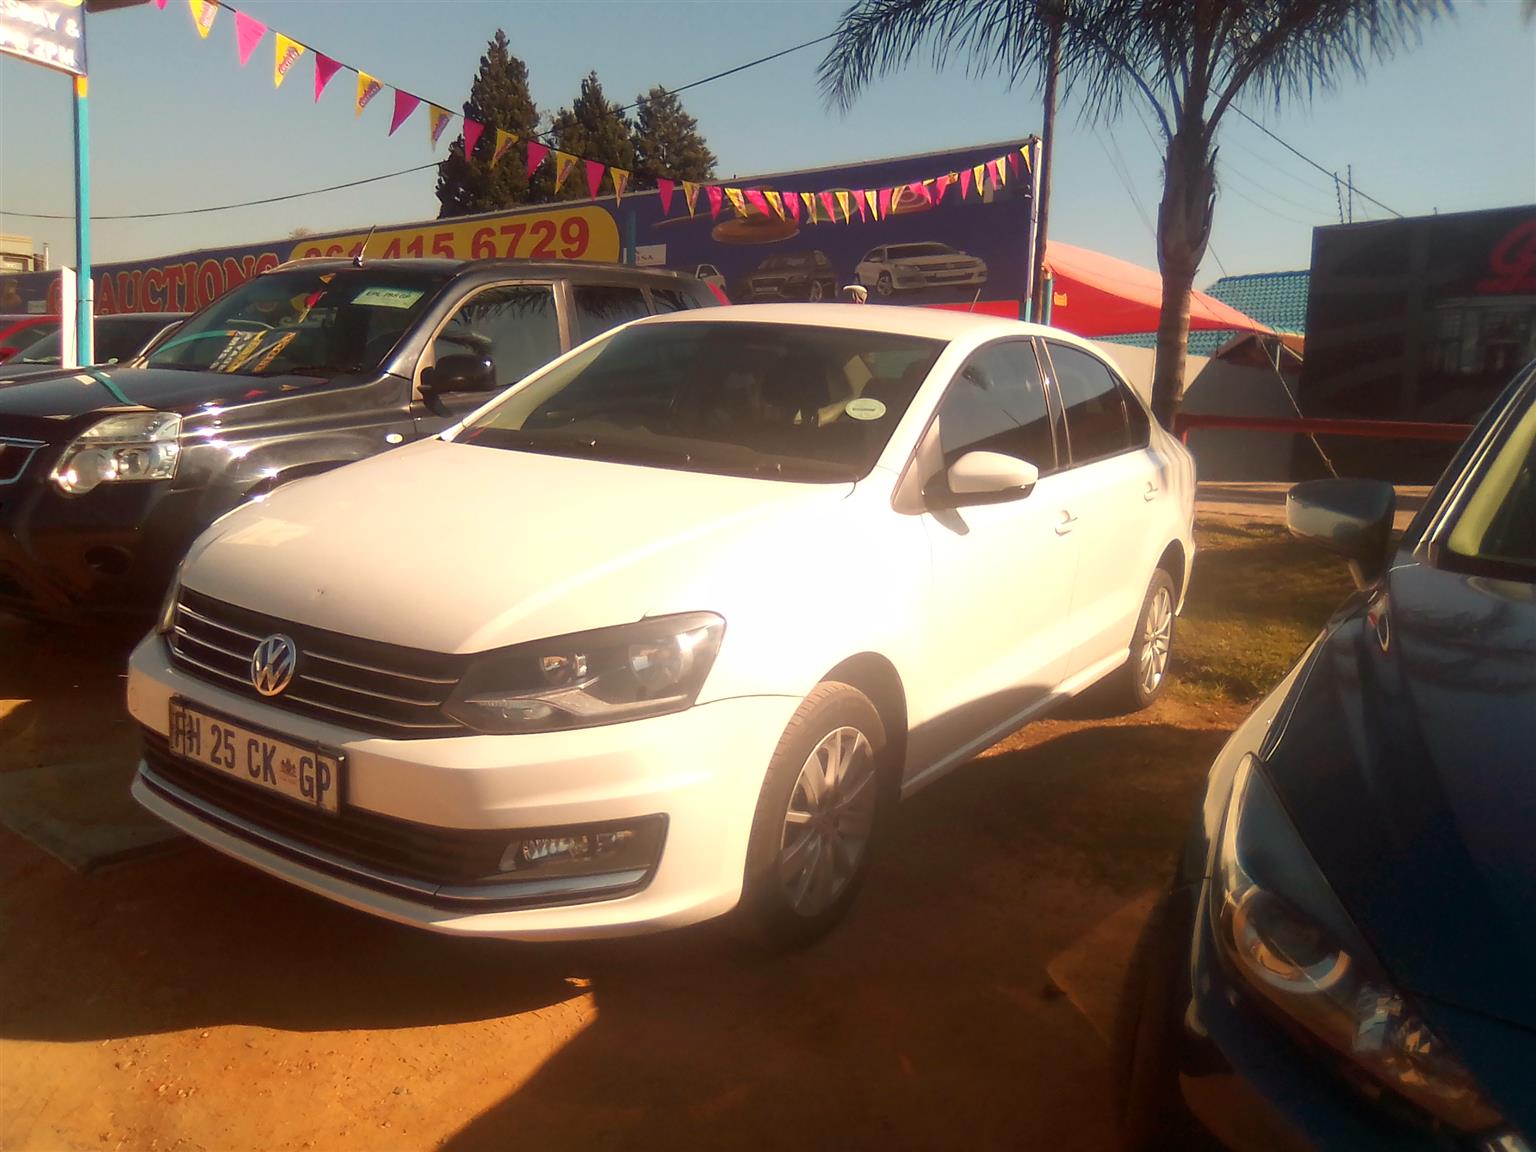 MEGA VEHICLE AUCTION- NO RESERVE, SATURDAY 29/06/19, 2PM. 280 Witkoppen Rd, Fourways. 061 415 6729 or www.gautengauctions.com  massive range of vehicles.